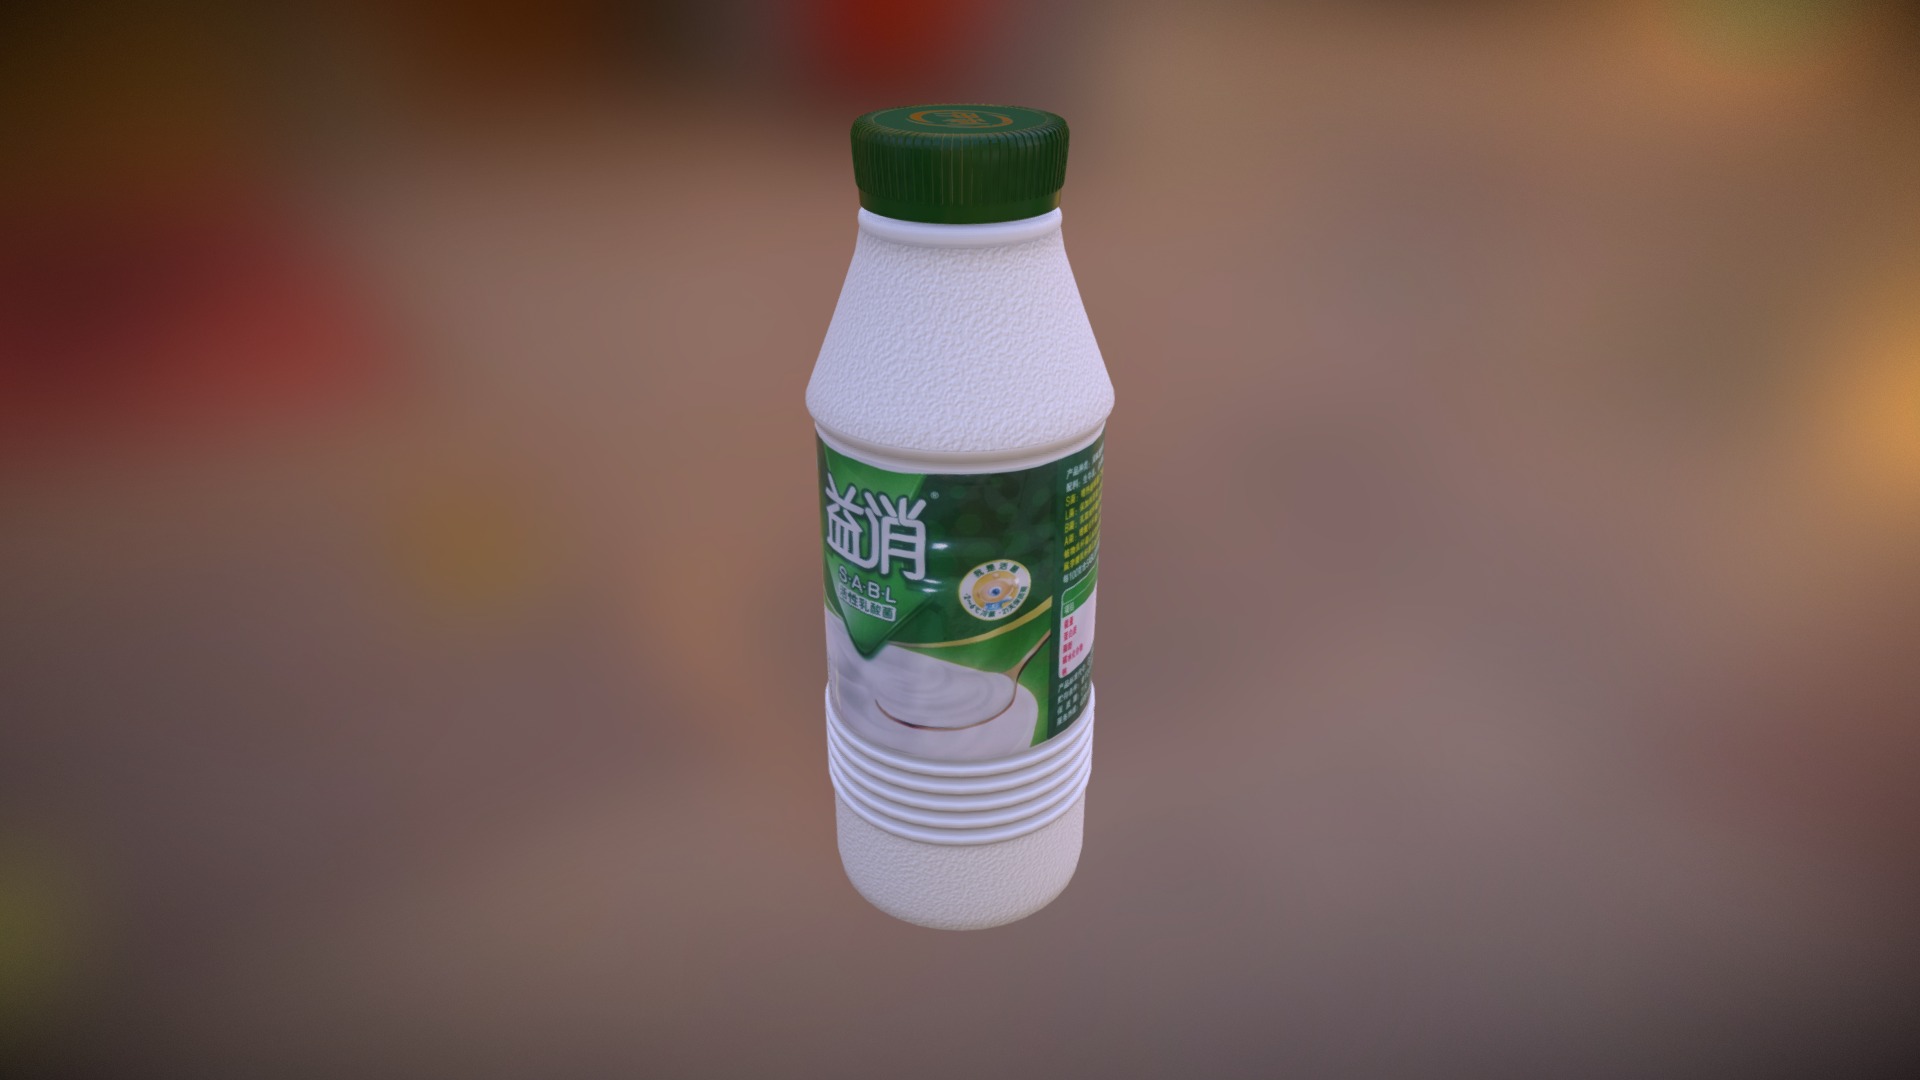 3D model 益消酸奶瓶子 - This is a 3D model of the 益消酸奶瓶子. The 3D model is about a bottle of soda.